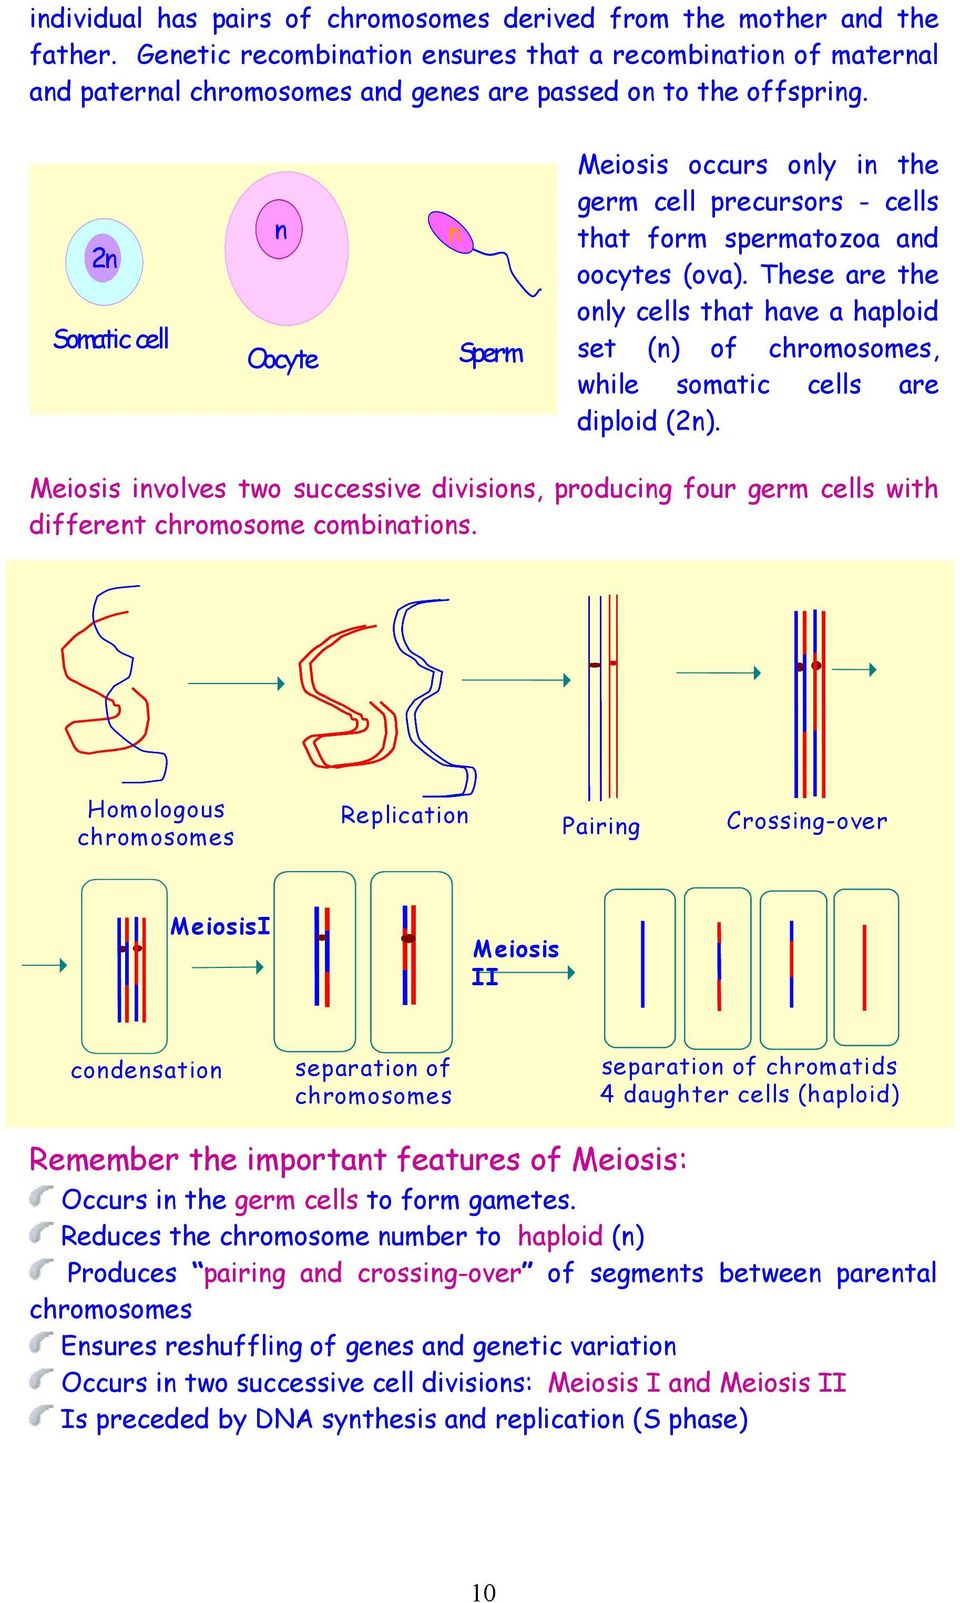 2n Somatic cell n Oocyte n Sperm Meiosis occurs only in the germ cell precursors - cells that form spermatozoa and oocytes (ova).